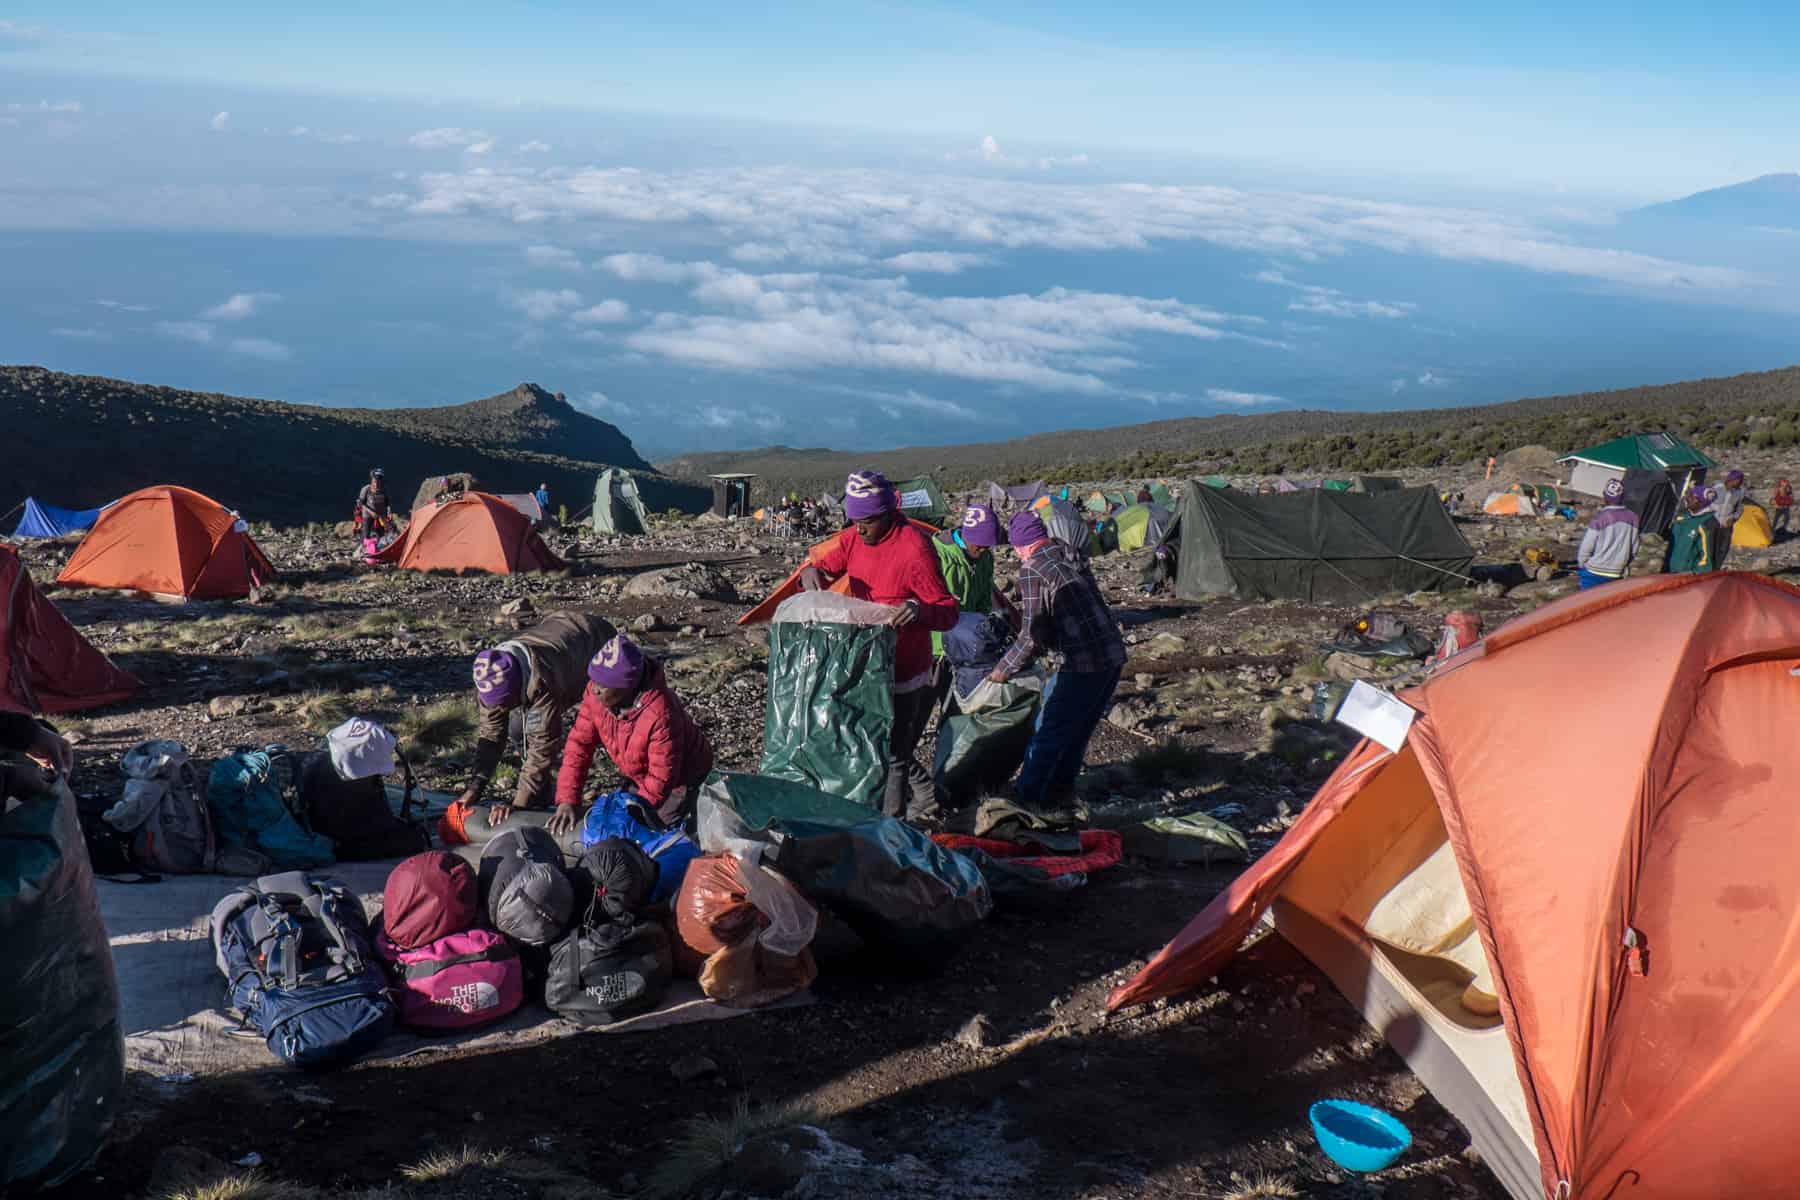 Porters on a Kilimanjaro trek packing bags at a campsite at high altitude. 